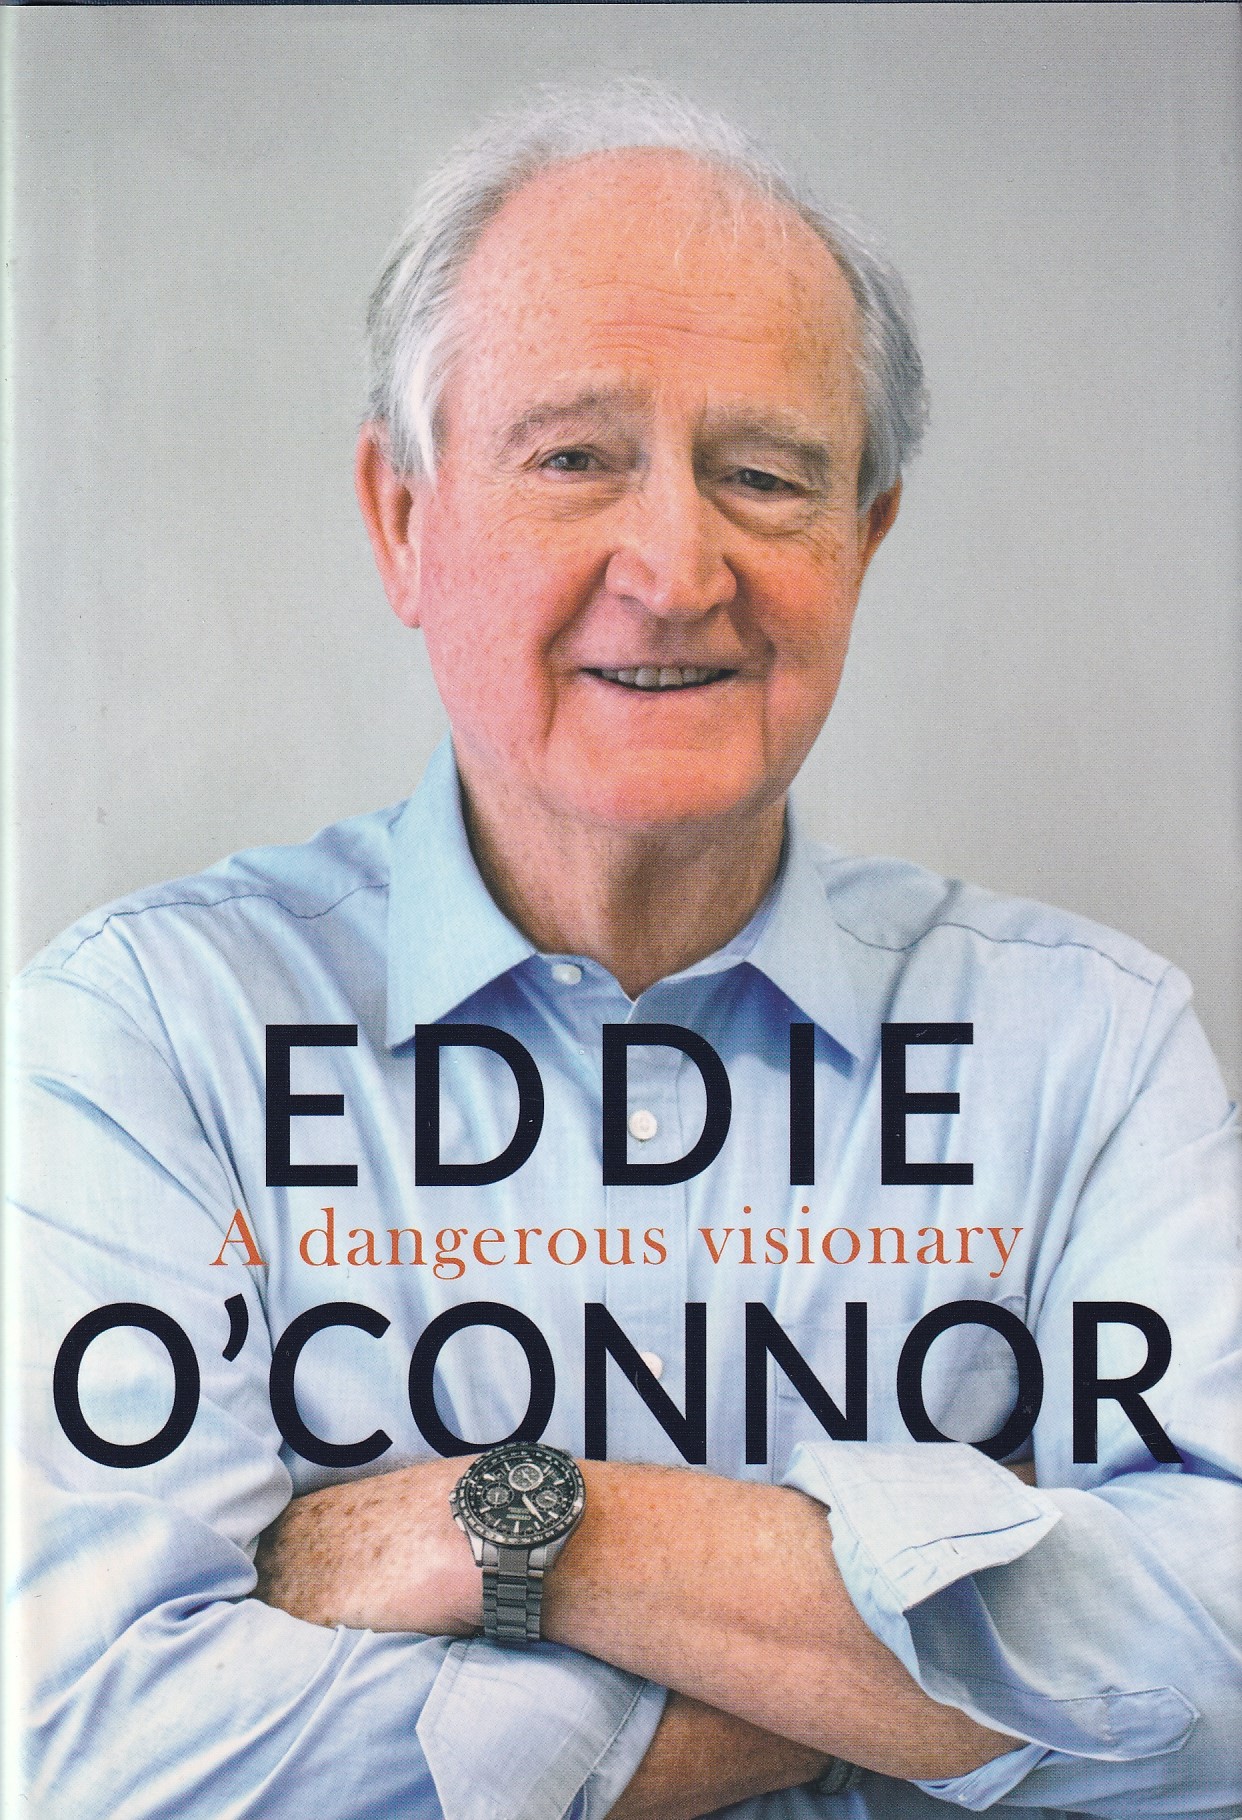 A Dangerous Visionary by Eddie O'Connor